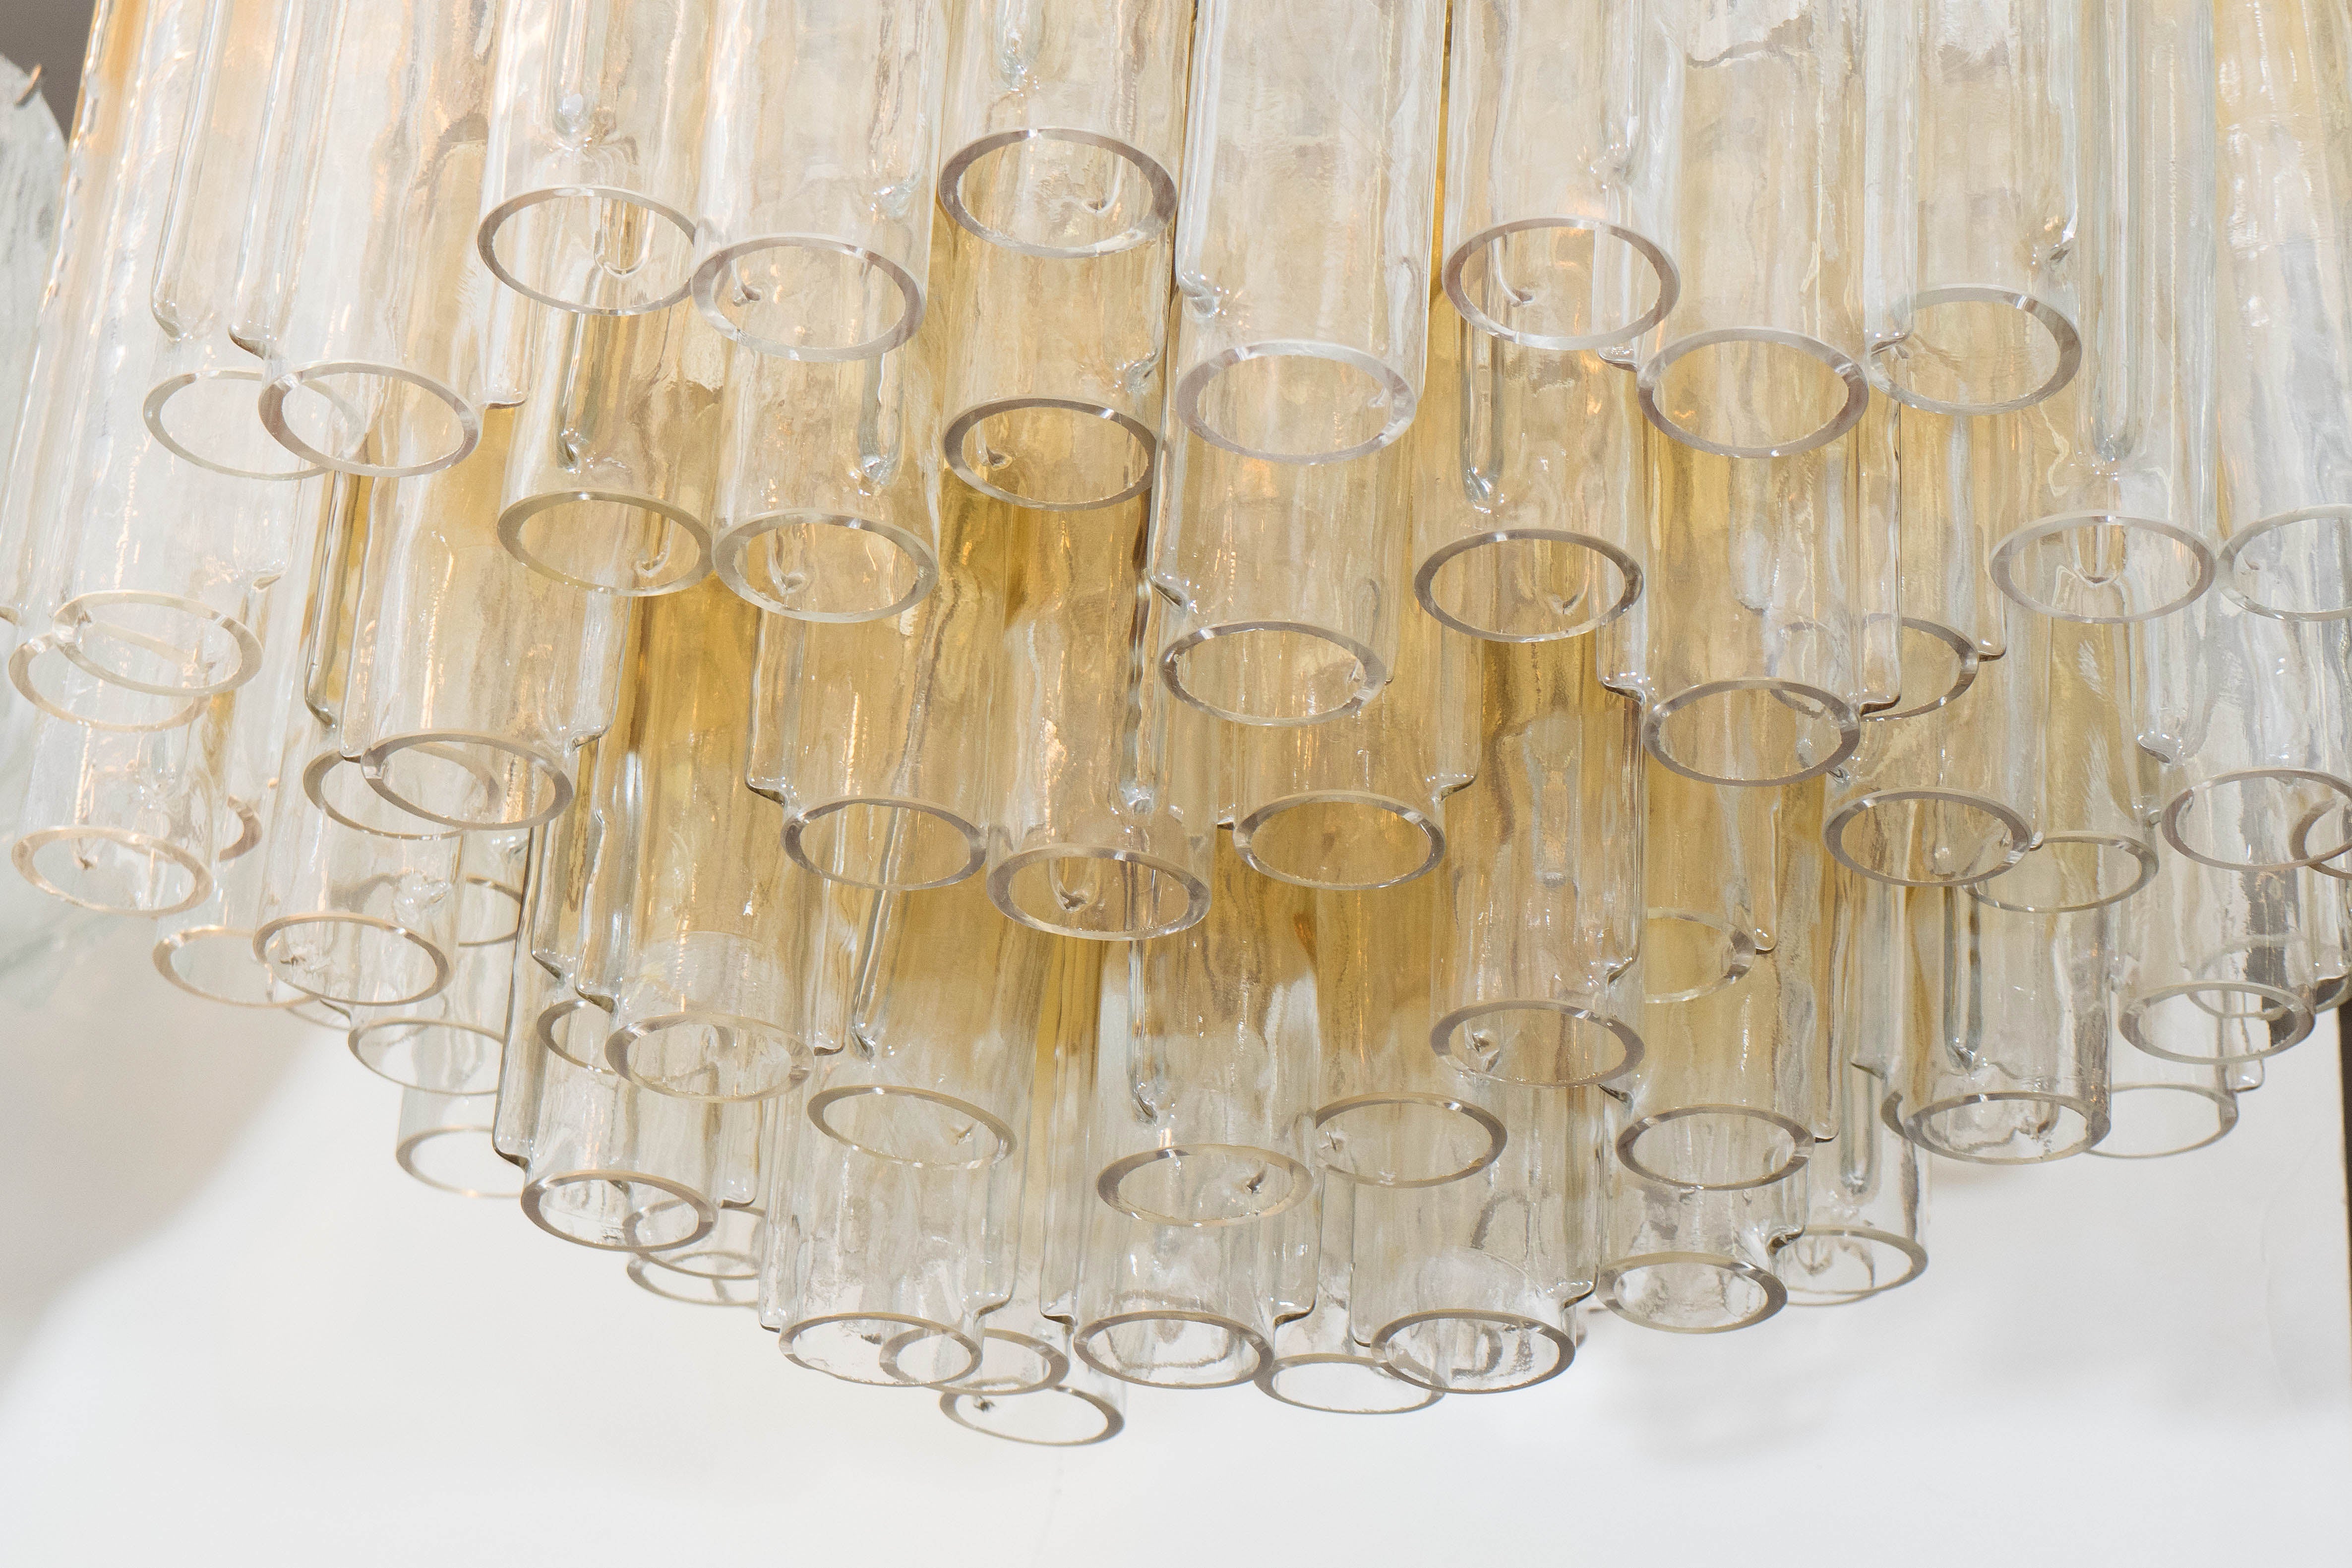 An Italian vintage, large scale Murano glass chandelier, produced circa 1960's by Venini, decorated with glass tubes, in golden yellow to clear ombre. Markings include stamp, [Venini/Murano/Made in Italy] affixed to the top of the frame. Requires